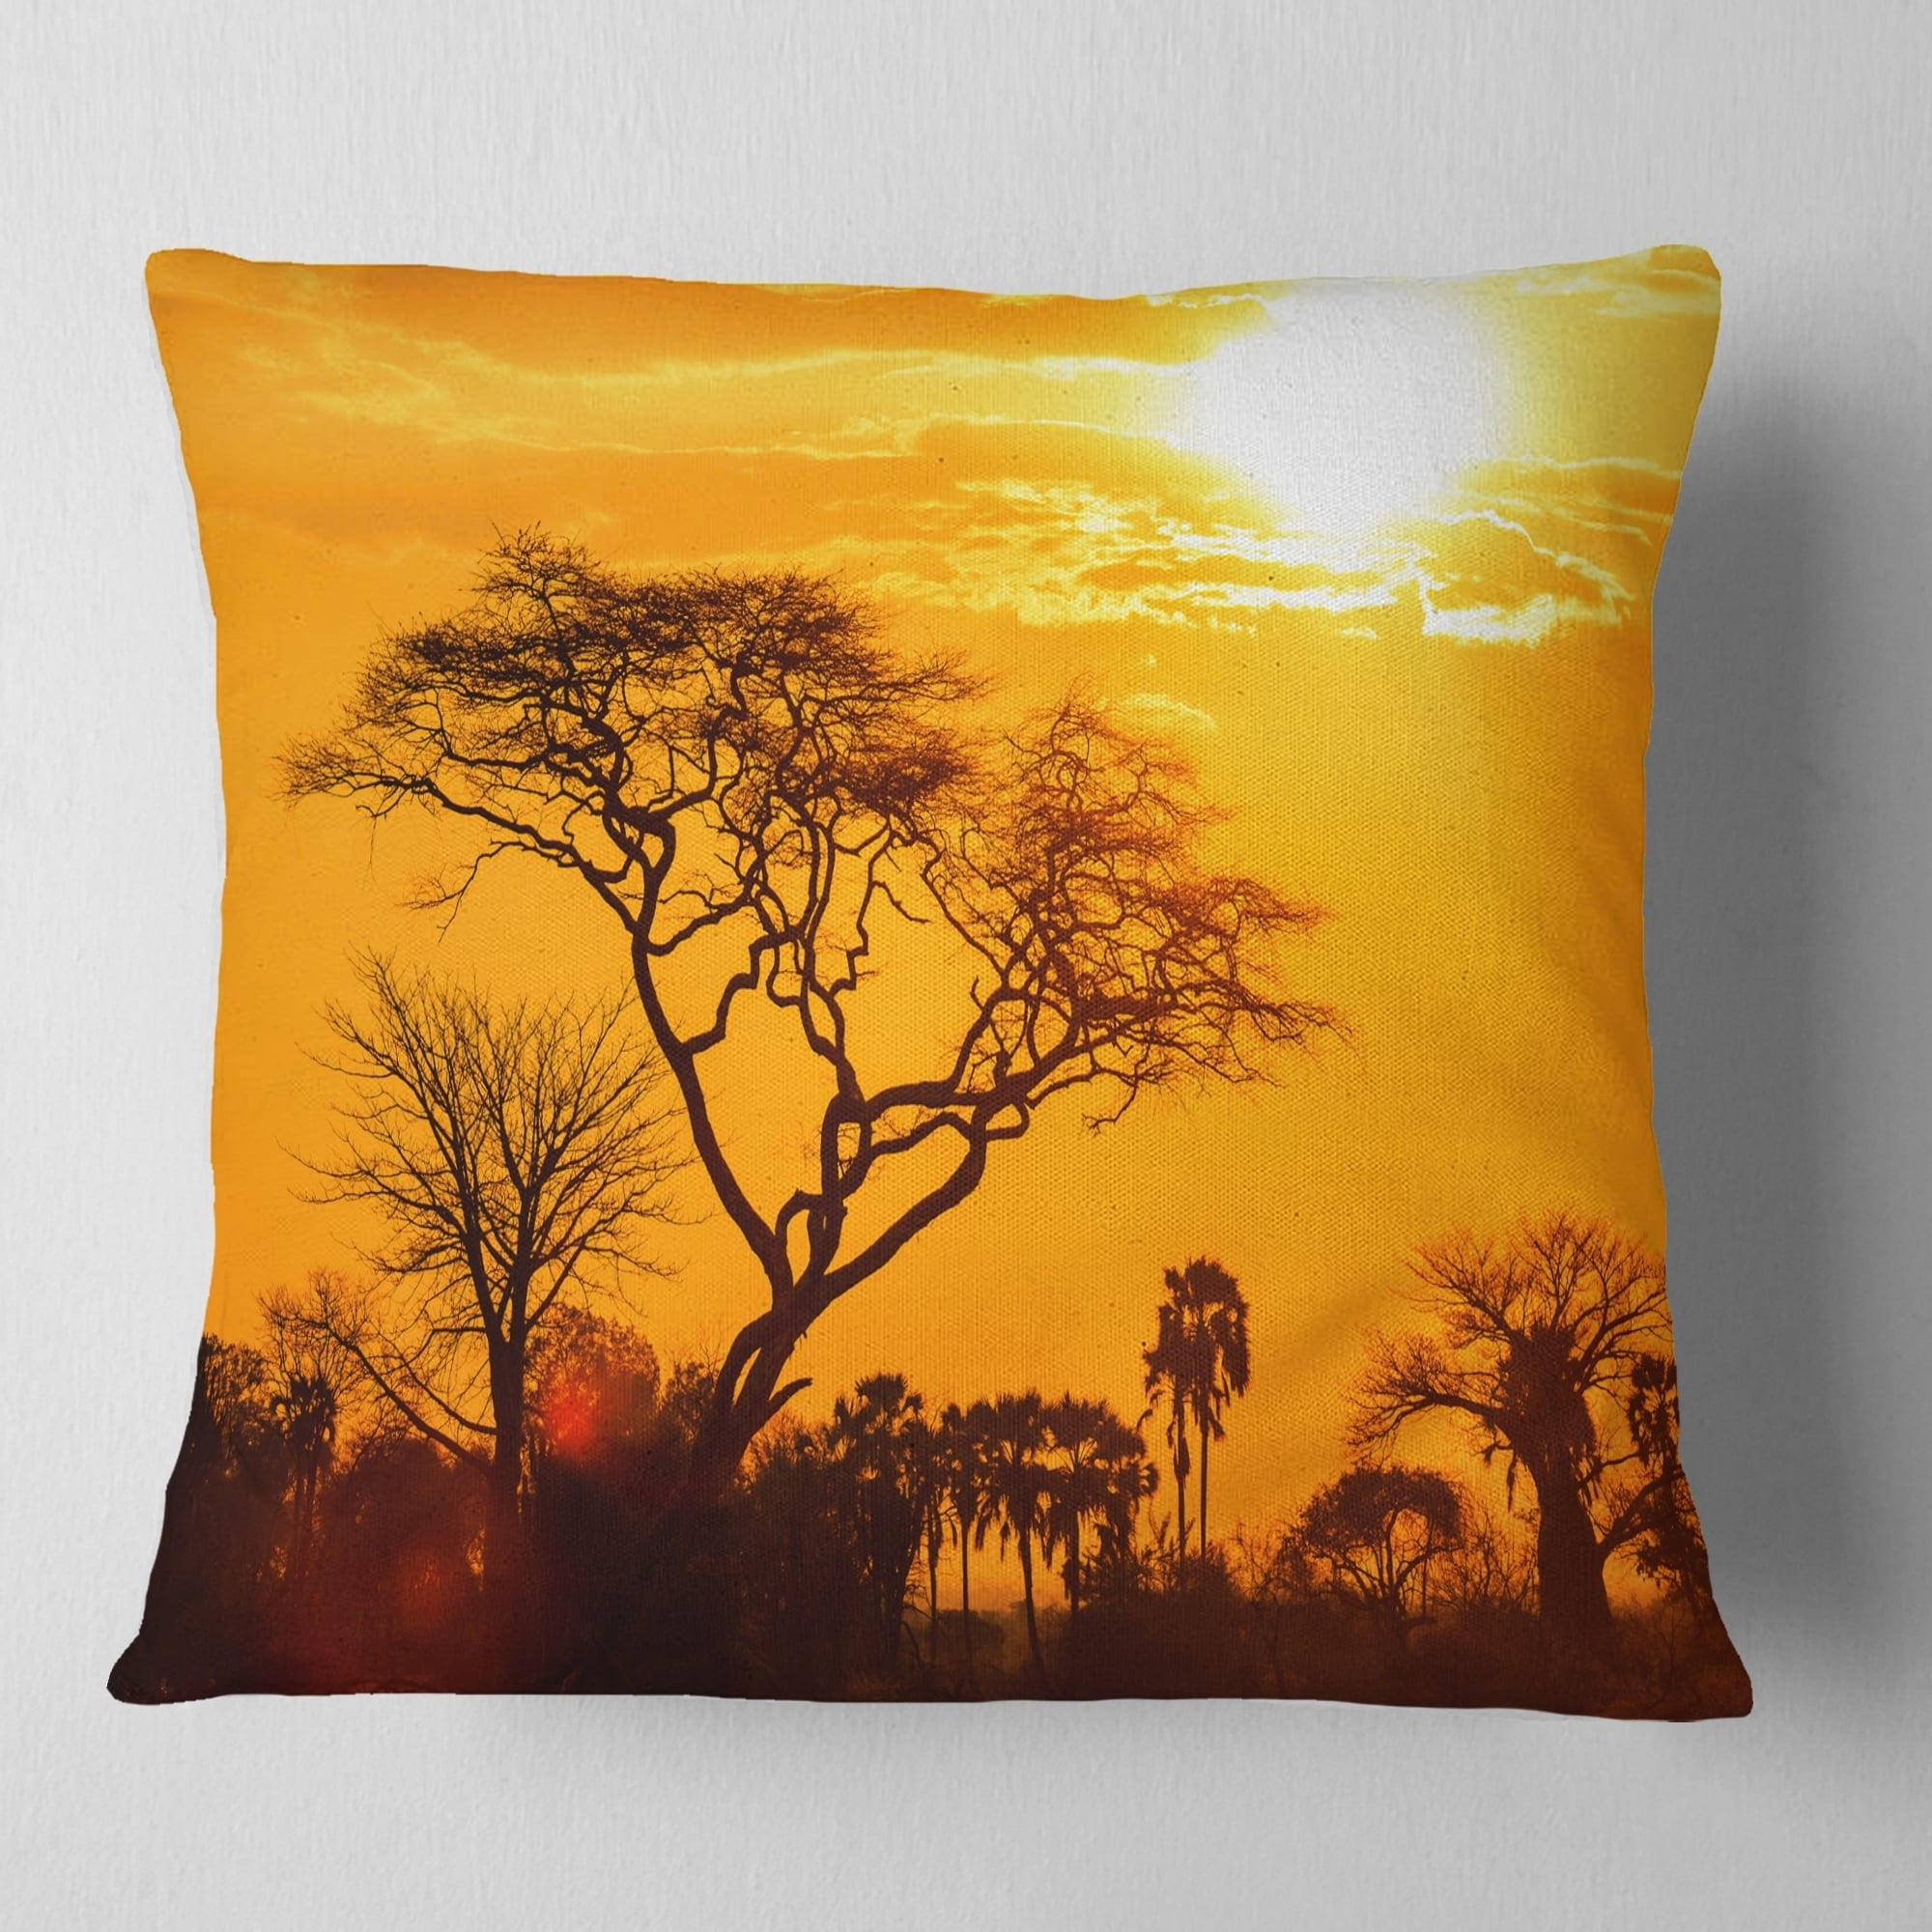 in Designart CU10884-26-26 Orange Glow of African Sunset Landscape Printed Cushion Cover for Living Room Sofa Throw Pillow 26 in x 26 in